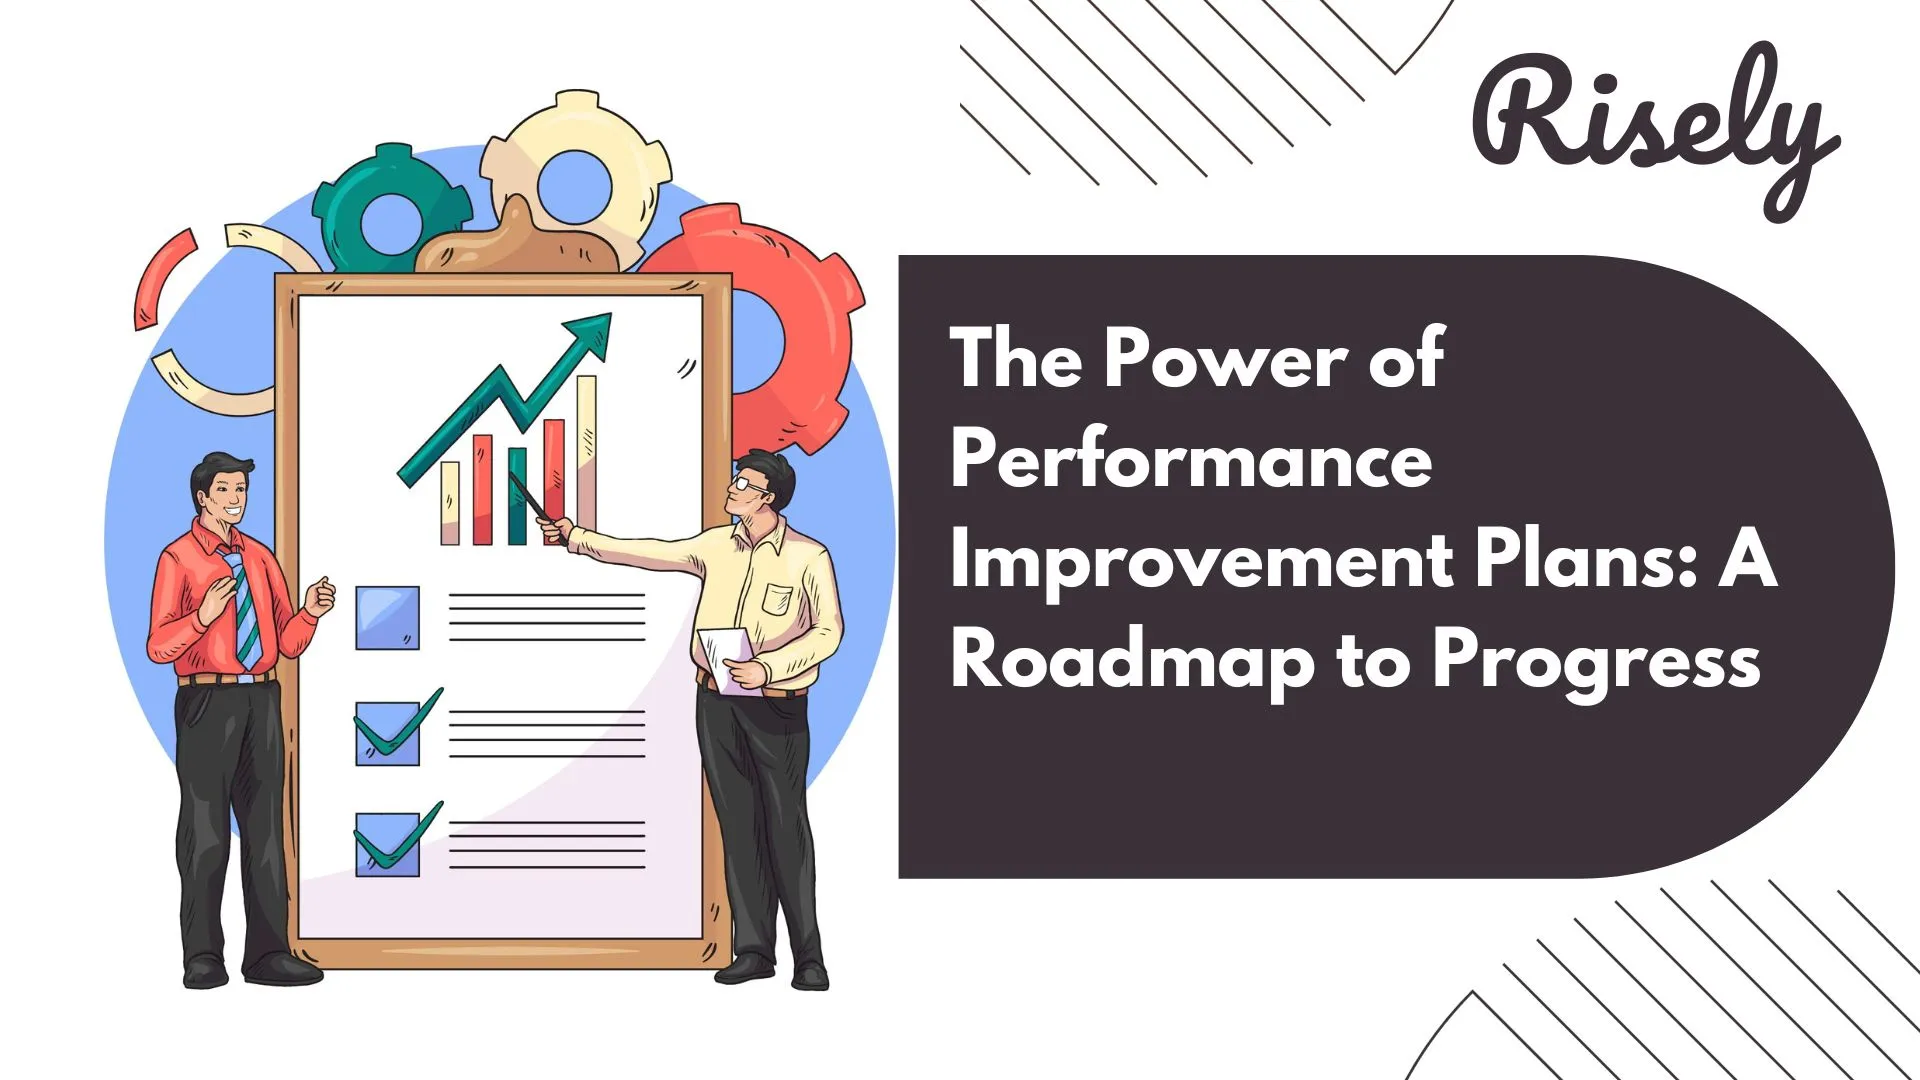 The Power of Performance Improvement Plans: A Roadmap to Progress